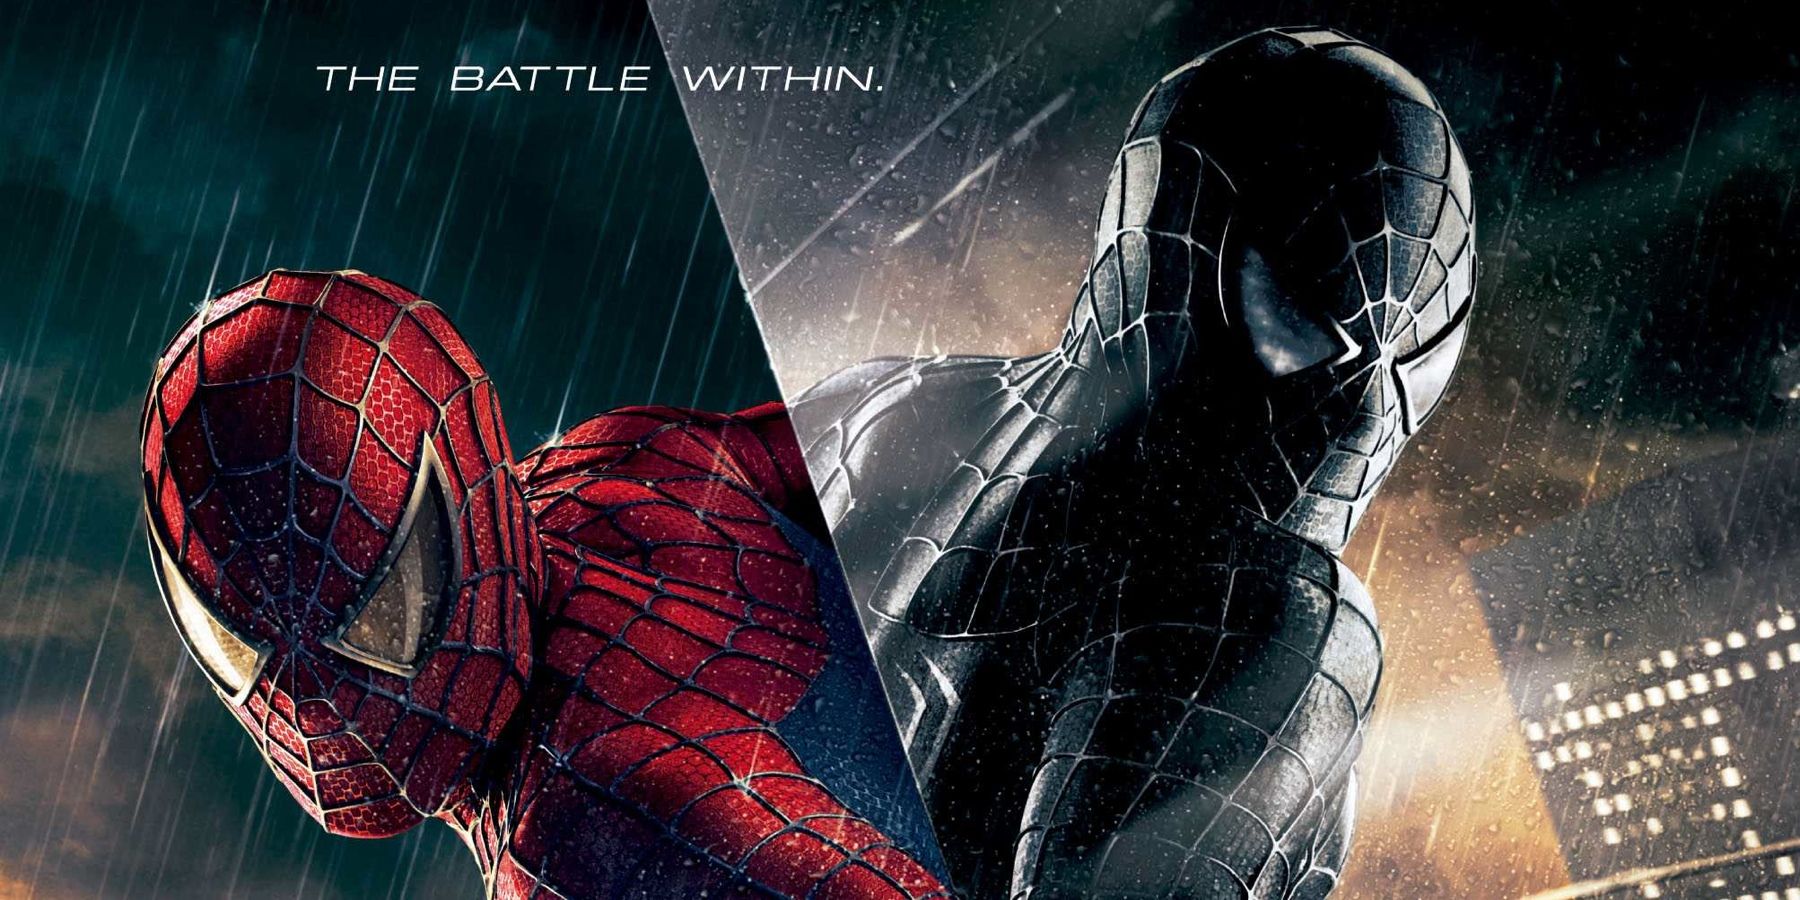 spiderman 3 the battle within game sony pictures